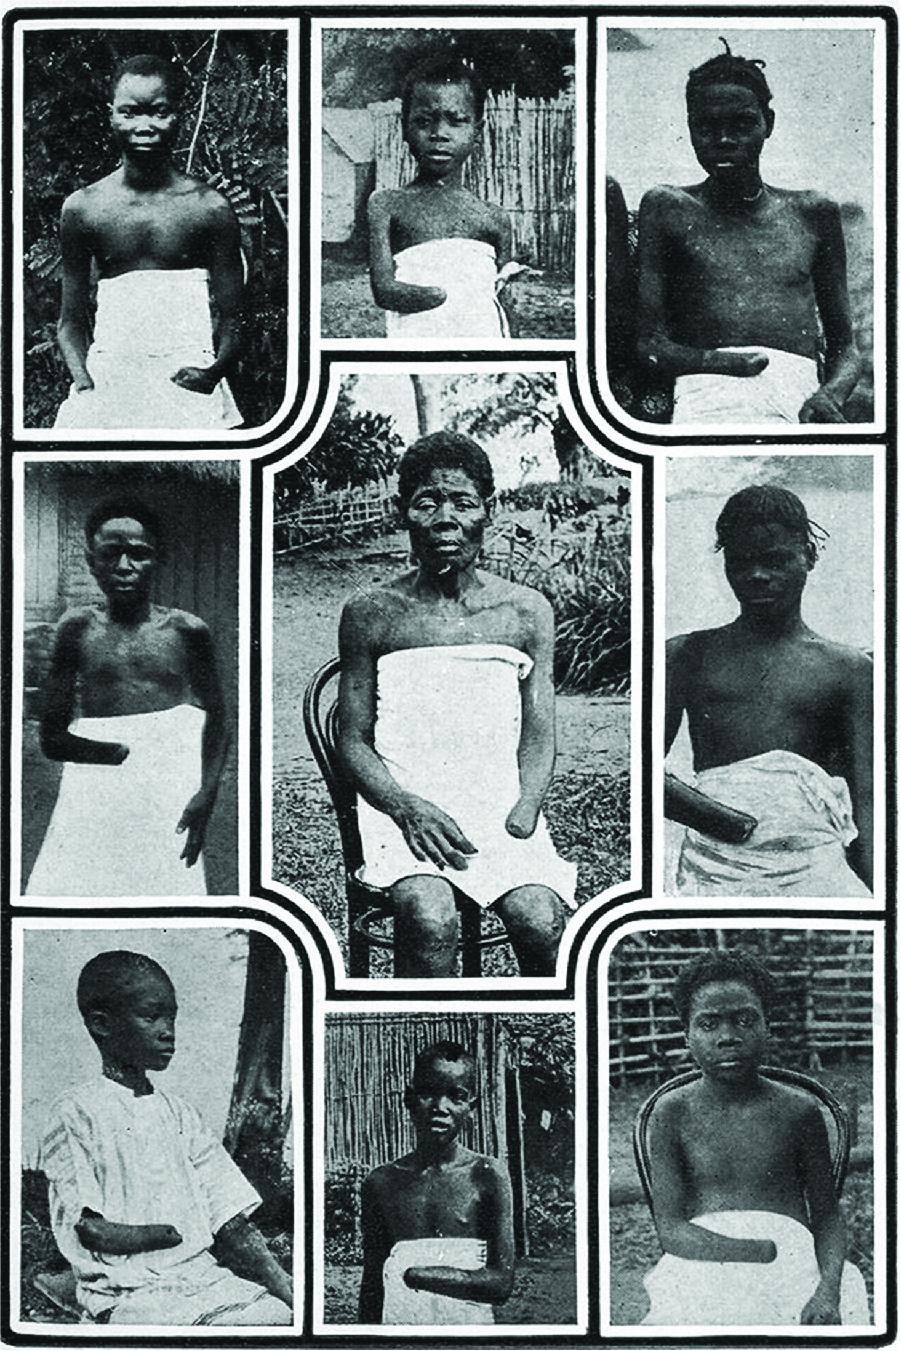 A photograph shows nine African American children and adults, in three rows of three. Eight of them wear only a cloth, either across their waist or higher on their chest, while one in the left bottom corner wears a while striped shirt. All of them are shown with one hand cut off. The backgrounds of the pictures show fields, straw huts, and wooden fences.